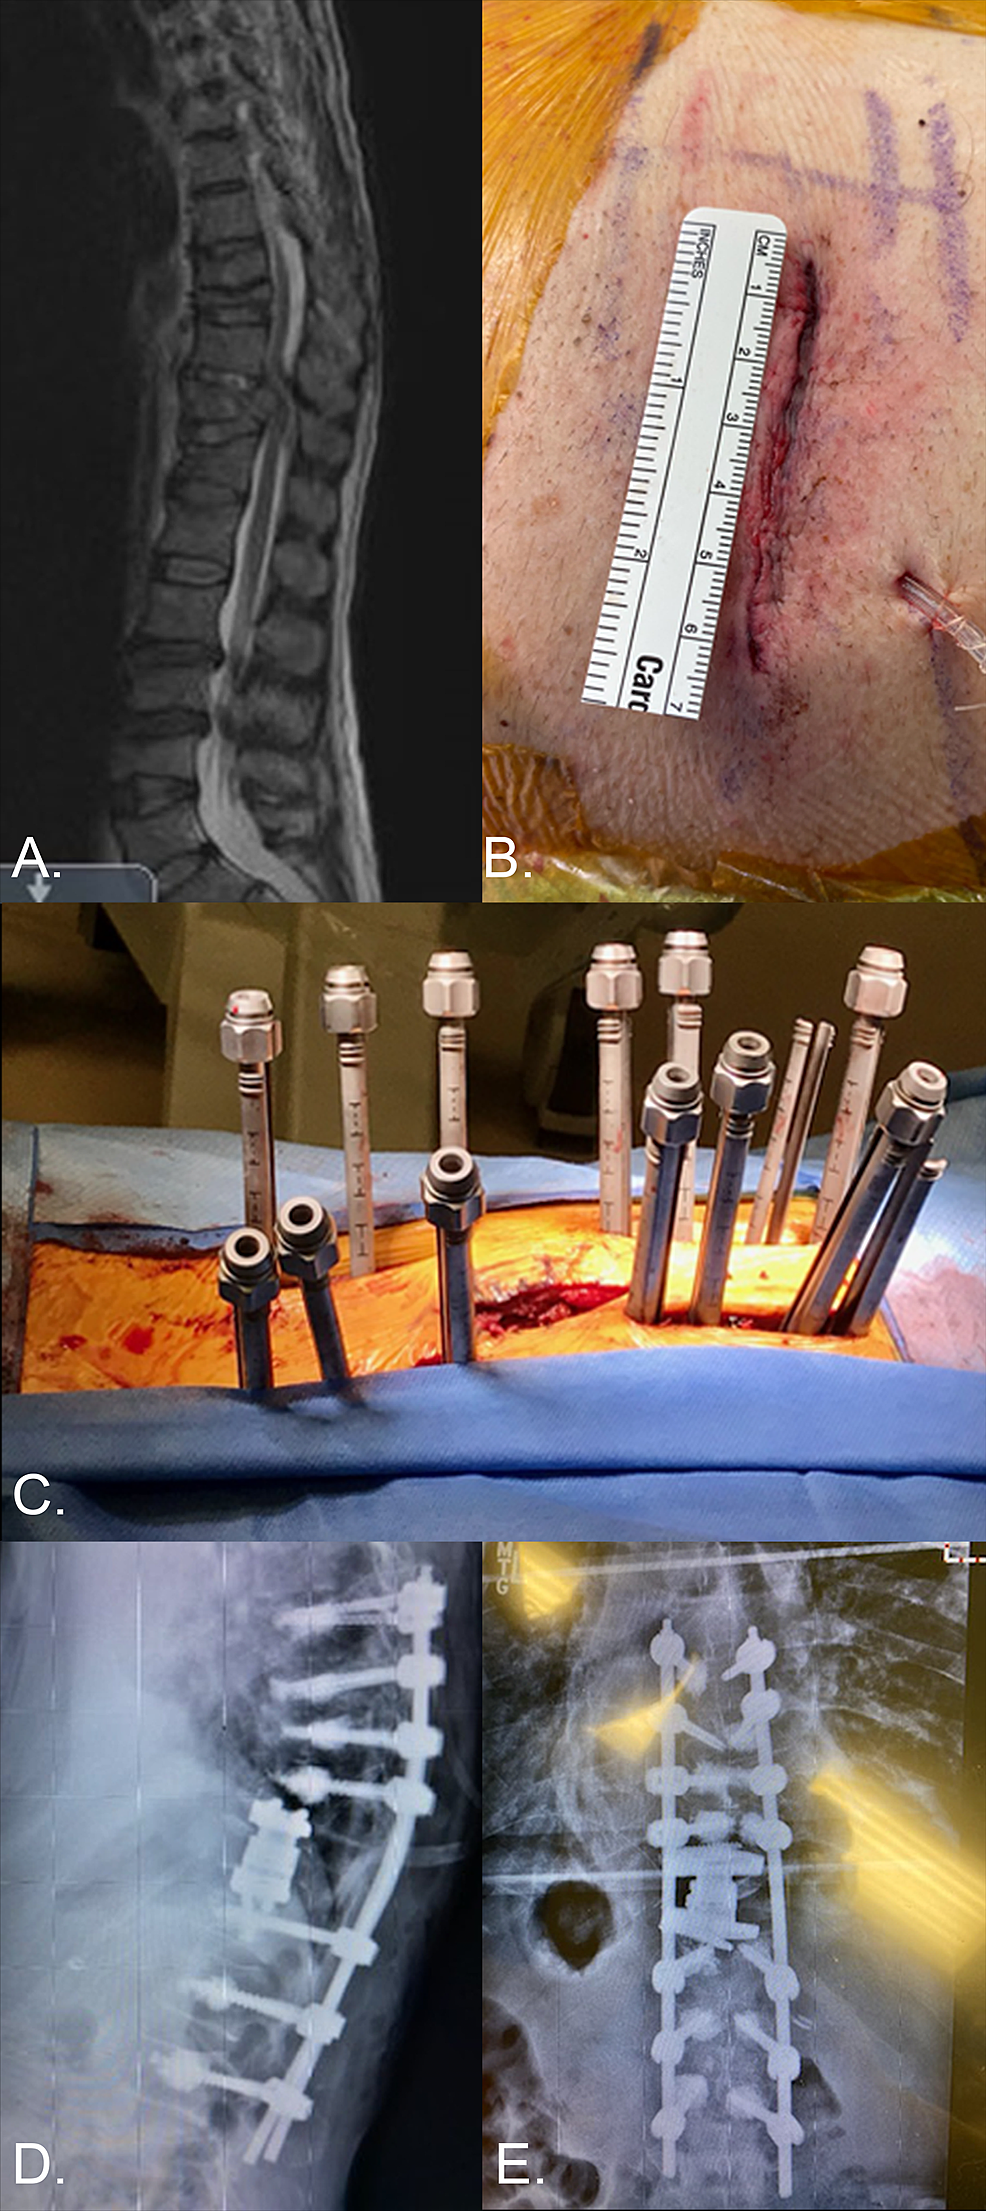 AR-case-by-CAM-employing-the-xvision-platform.-A.-T2W-MRI-demonstrating-T11-pathologic-compression-fracture-resulting-in-severe-spinal-canal-compression,-as-well-as-multiple-chronic-compression-fractures-in-a-58-year-old-myelopathic-male-with-history-of-lung-cancer-and-severe-osteoporosis-(T-score:-2.8).-B.-Stage-1-mini-open-retropleural-thoracotomy-for-T11-corpectomy.-C,D,E:-Stage-2-percutaneous-cement-augmented-T7---L2-pedicle-screw-and-rod-fixation.-Case-highlights-the-utility-of-AR-applications-in-executing-technically-demanding-MIS-applications.-In-this-case,-the-precise-insertion-of-thoracolumbar-pedicle-screws-via-AR-permitted-safe-cement-augmentation-without-visceral,-vascular,-canal,-or-foraminal-cement-extravasation.